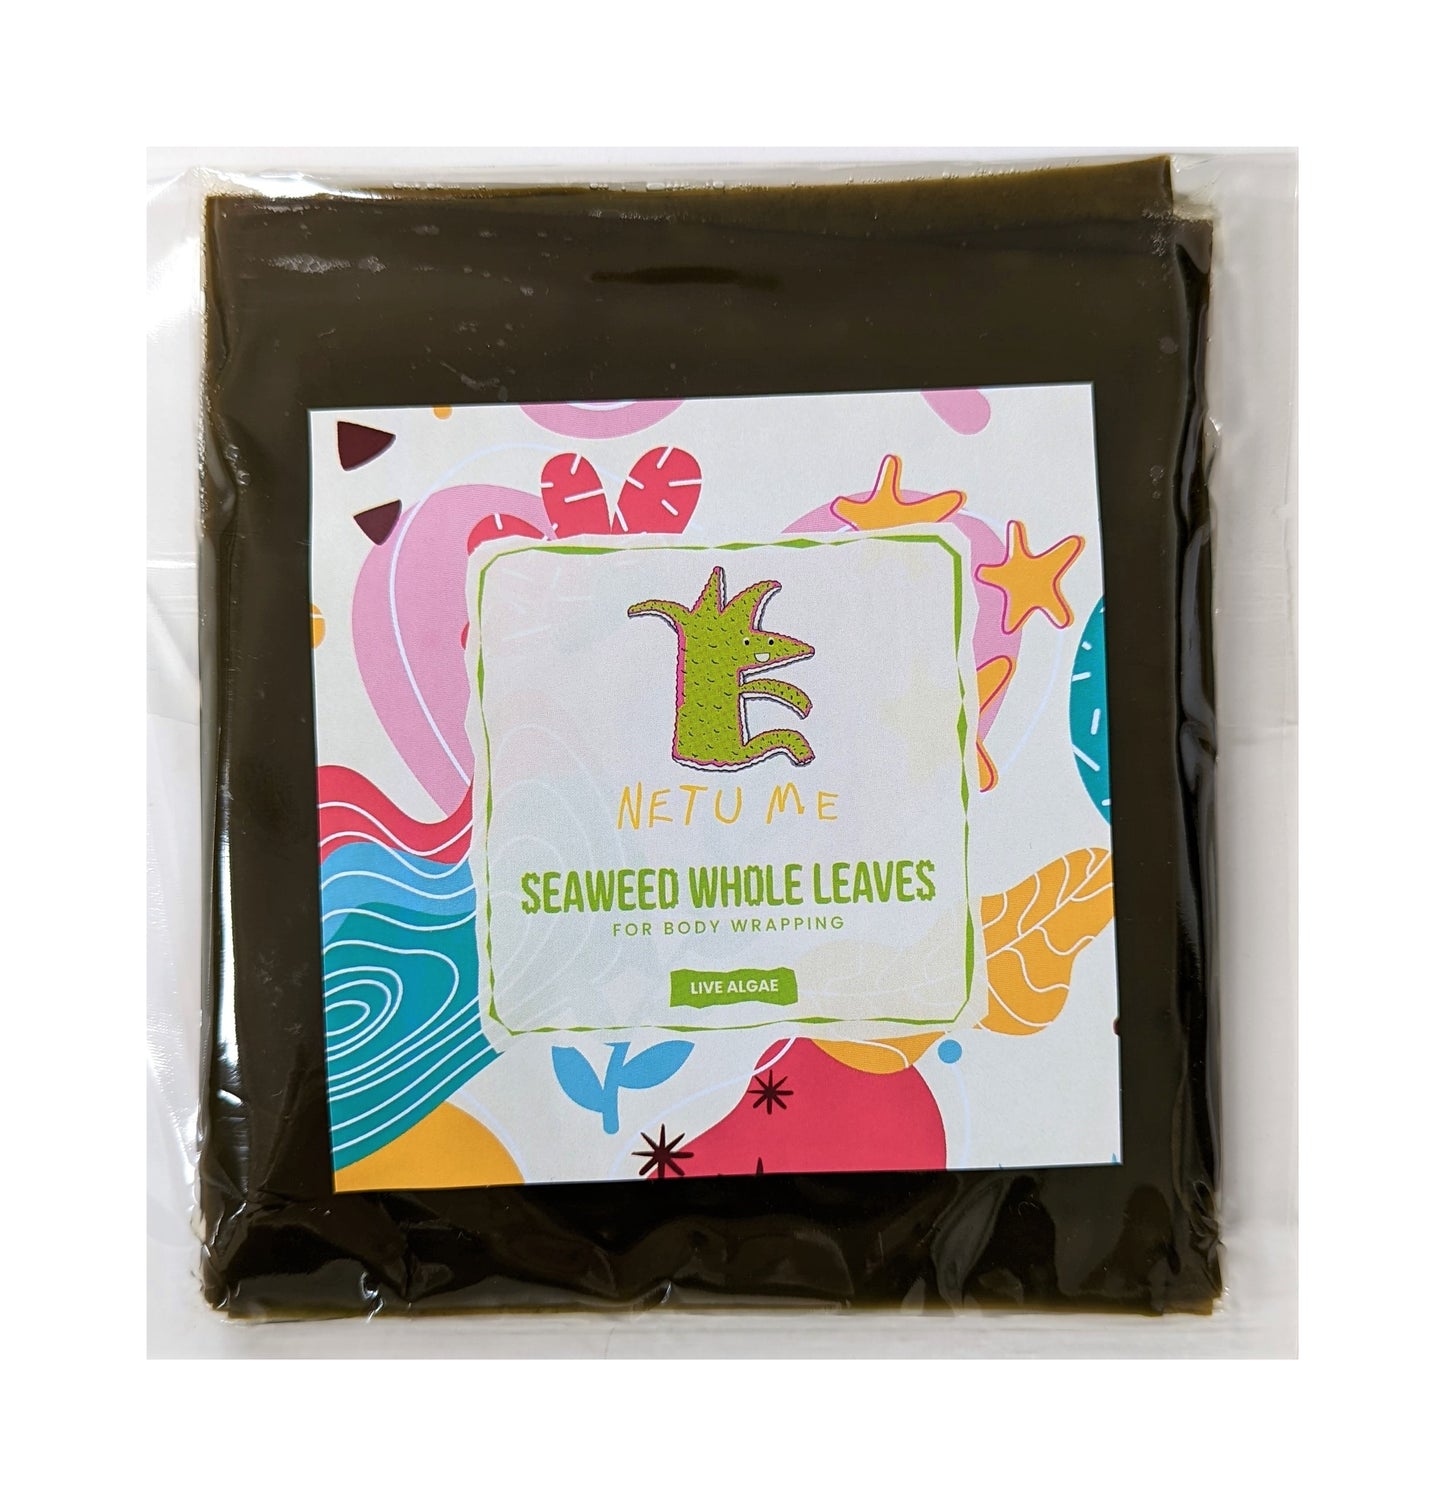 Live Seaweed Anti- Cellulite Body Wrapping. Whole Wet Leaves